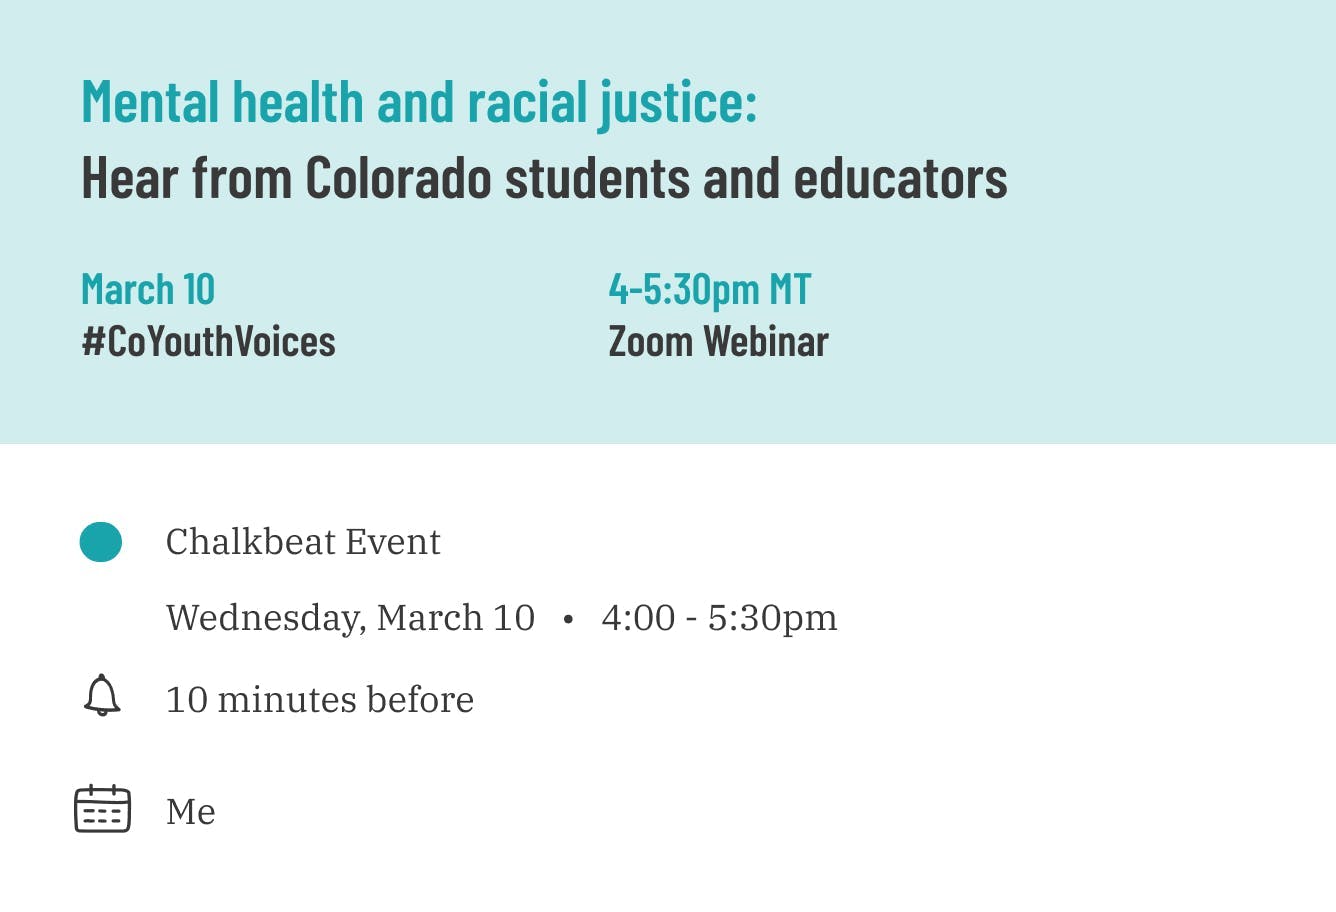 A screenshot of an invitation to a Chalkbeat Colorado event about mental health and racial justice.